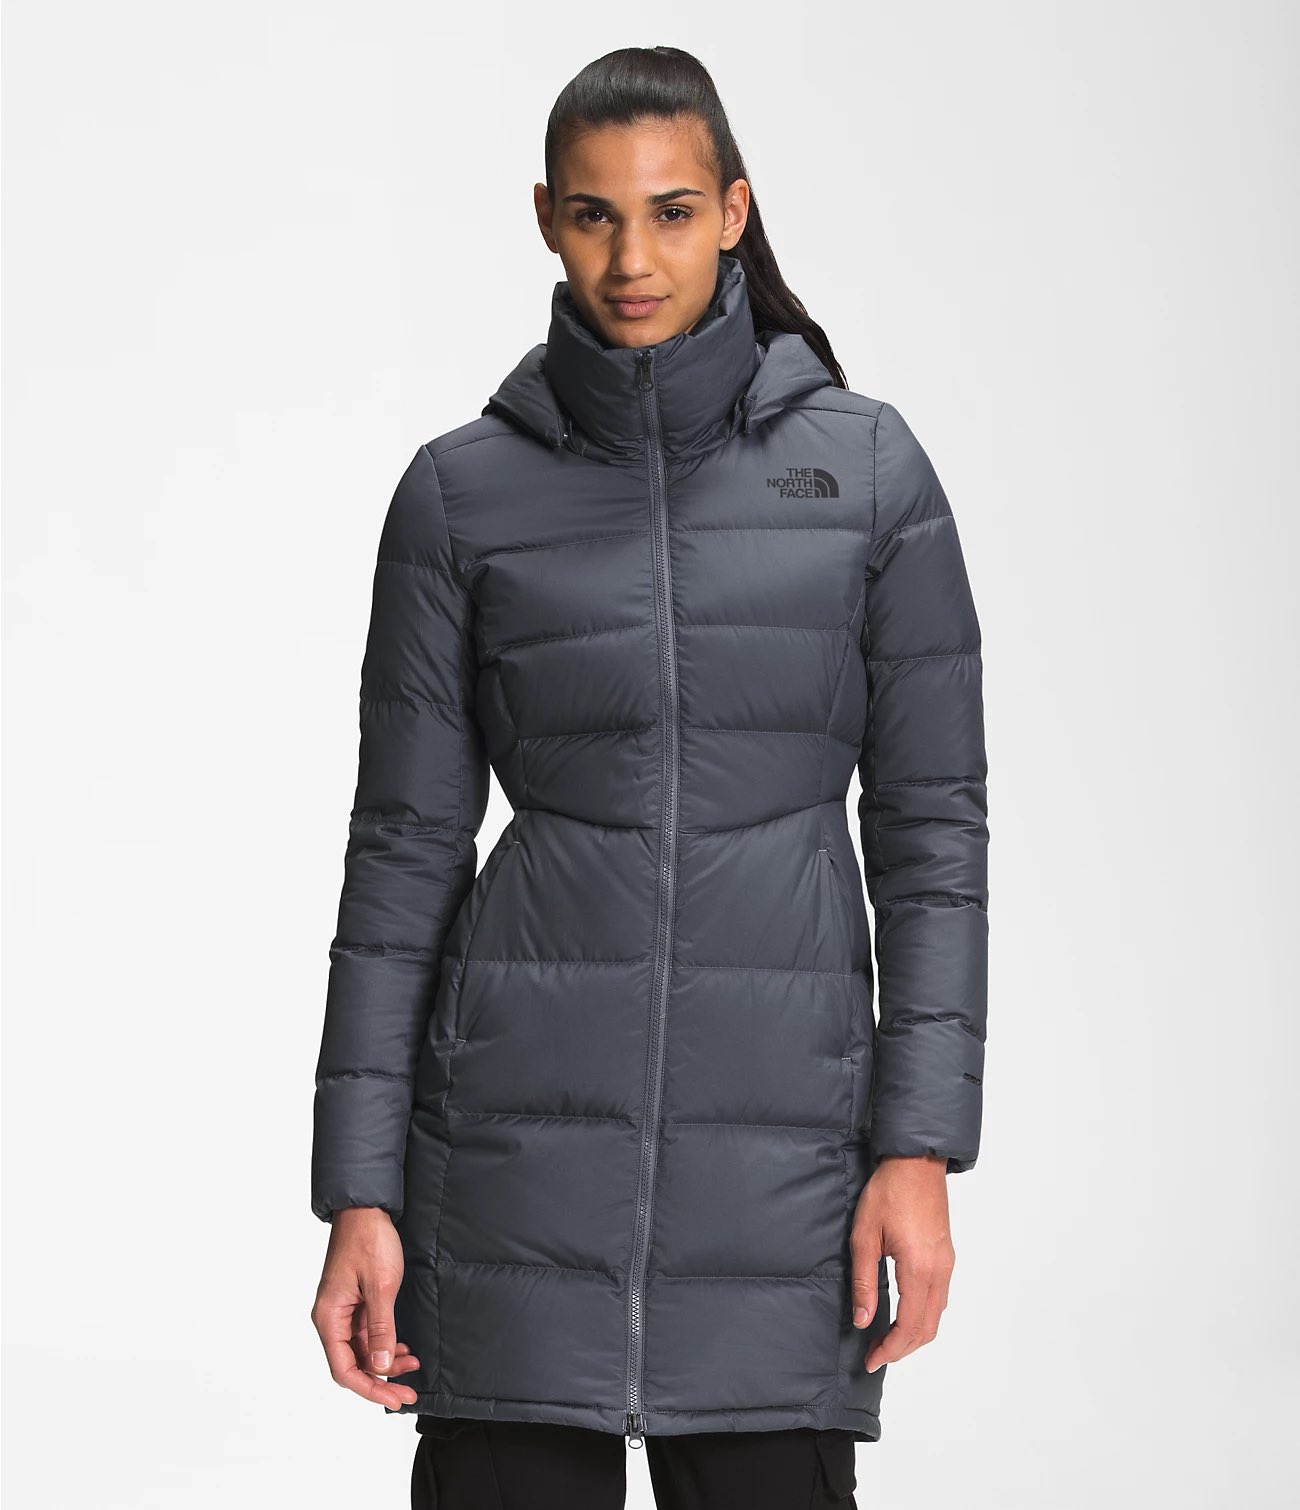 The North Face Coats Are 40% Off for Cyber Monday | Well+Good